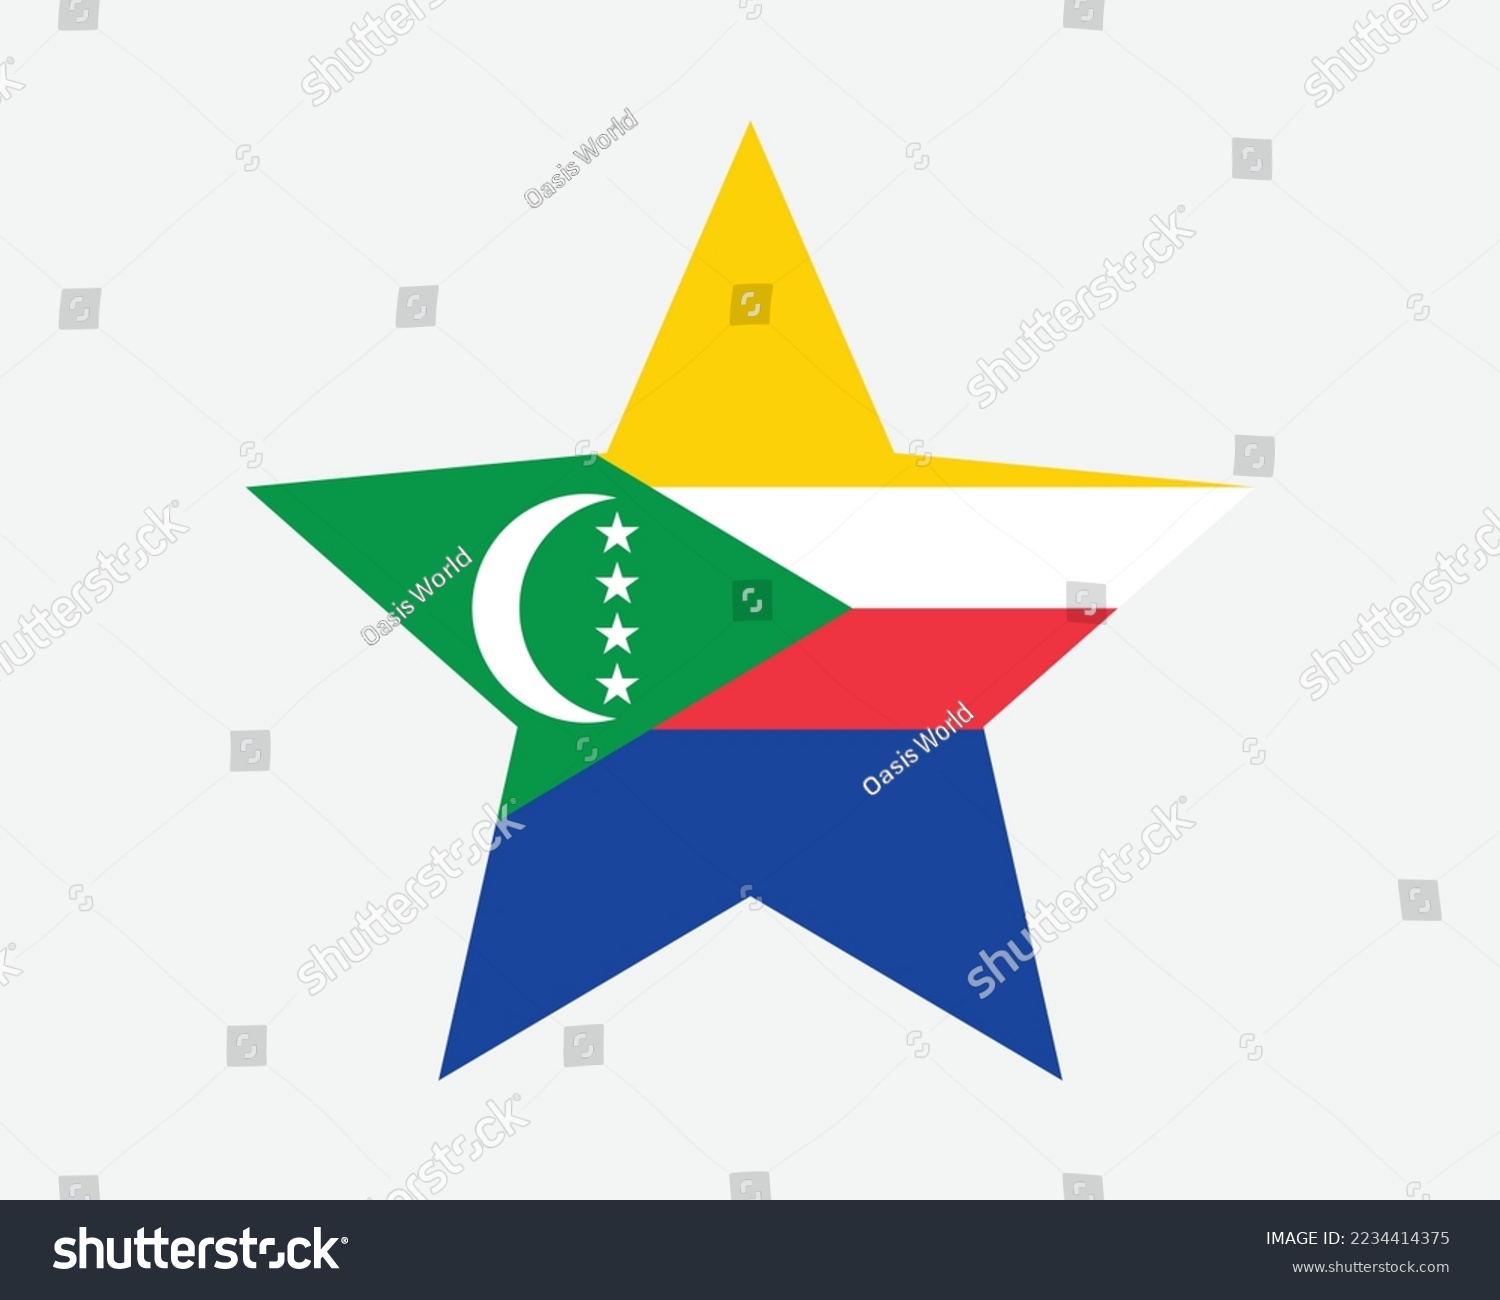 SVG of Comoros Star Flag. Comorian Star Shape Flag. Union of the Comoros Country National Banner Icon Symbol Vector 2D Flat Artwork Graphic Illustration svg